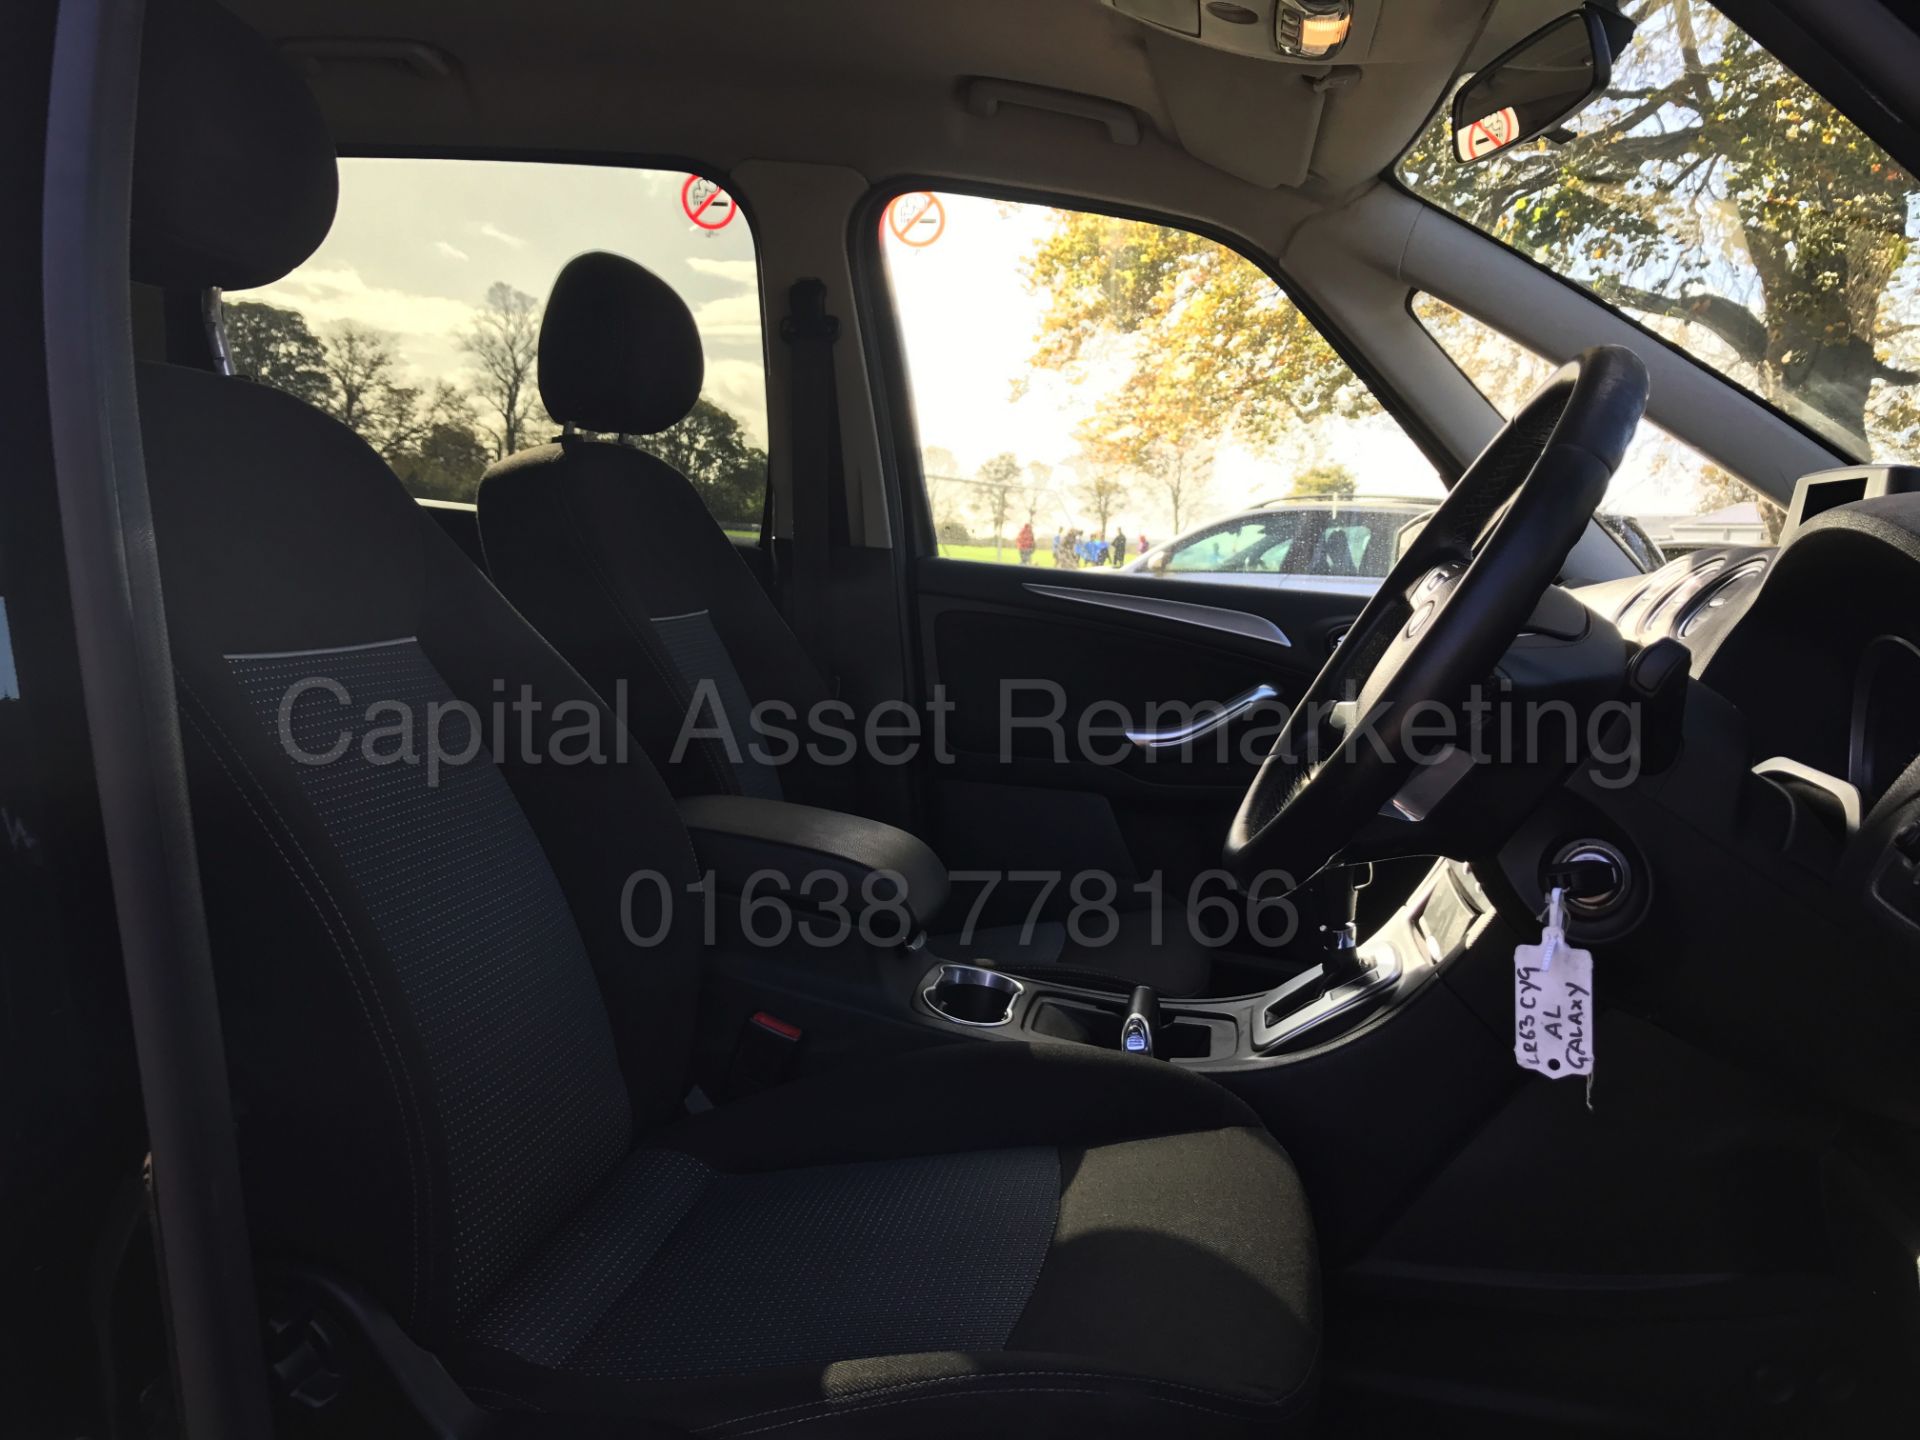 (ON SALE) FORD GALAXY 'ZETEC' 7 SEATER MPV (2014 MODEL) '2.0 TDCI -140 BHP' (1 OWNER) *FULL HISTORY* - Image 19 of 28